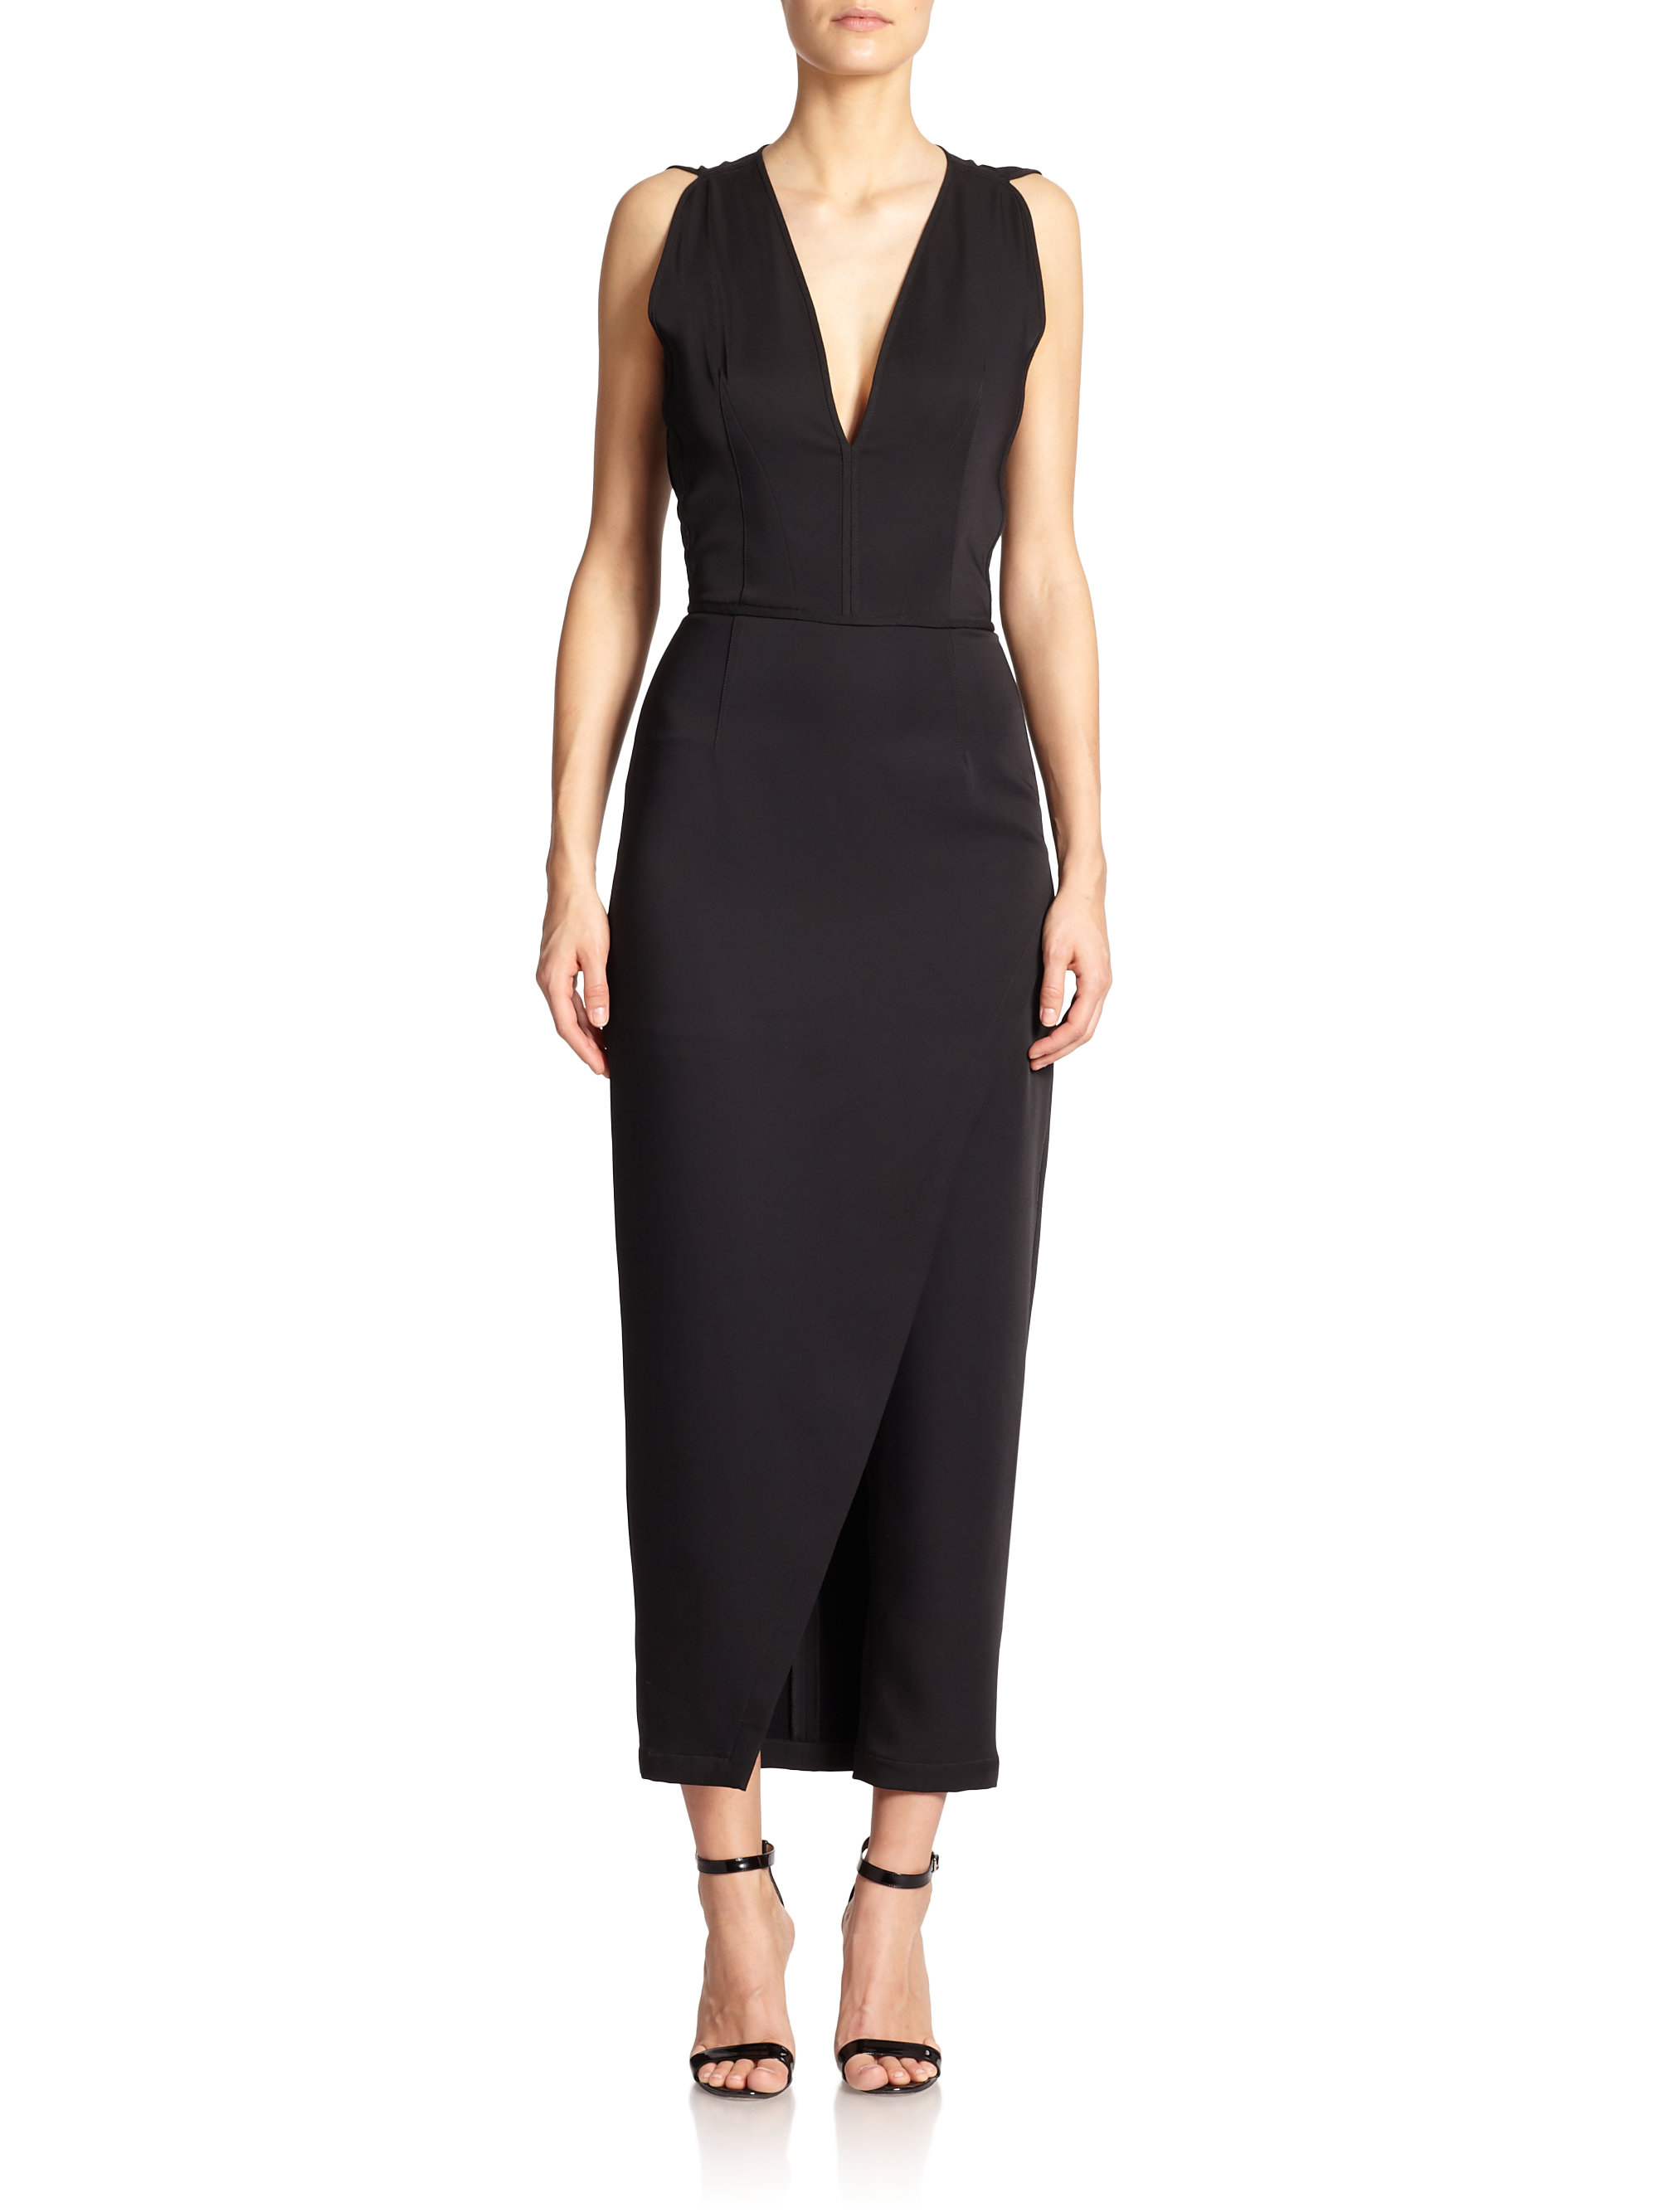 Yigal azrouël Crepe Wrap-Skirt Jumpsuit in Black | Lyst